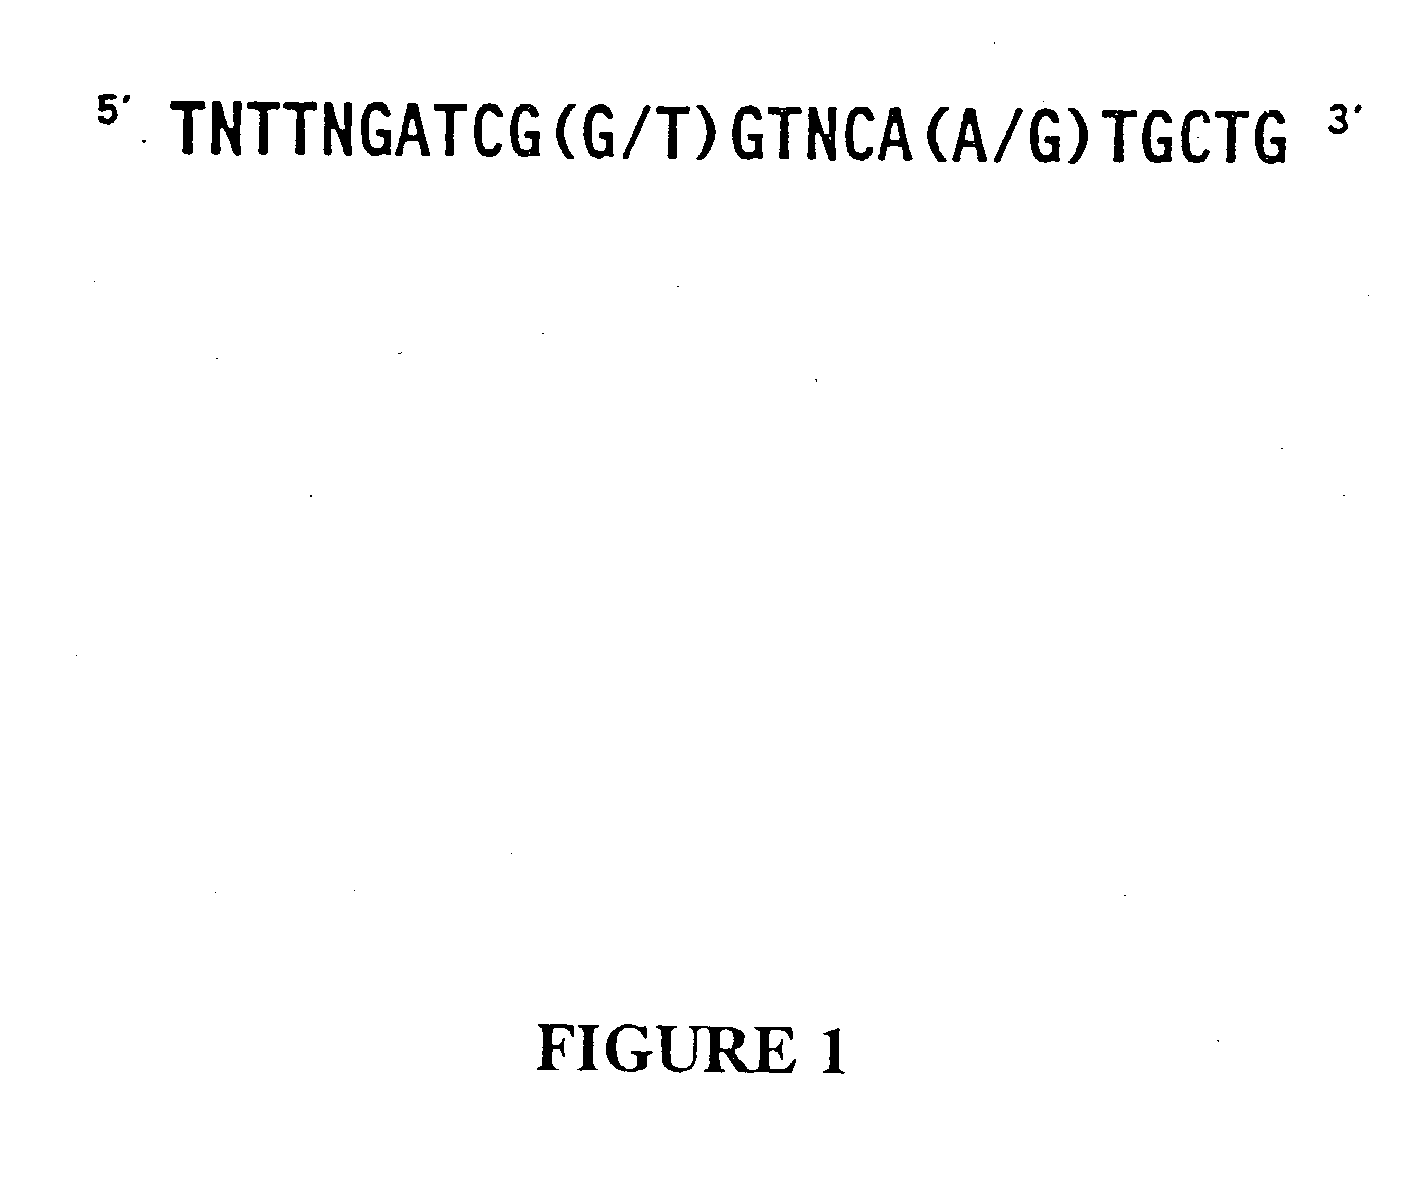 Plant retroviral polynucleotides and methods for use thereof